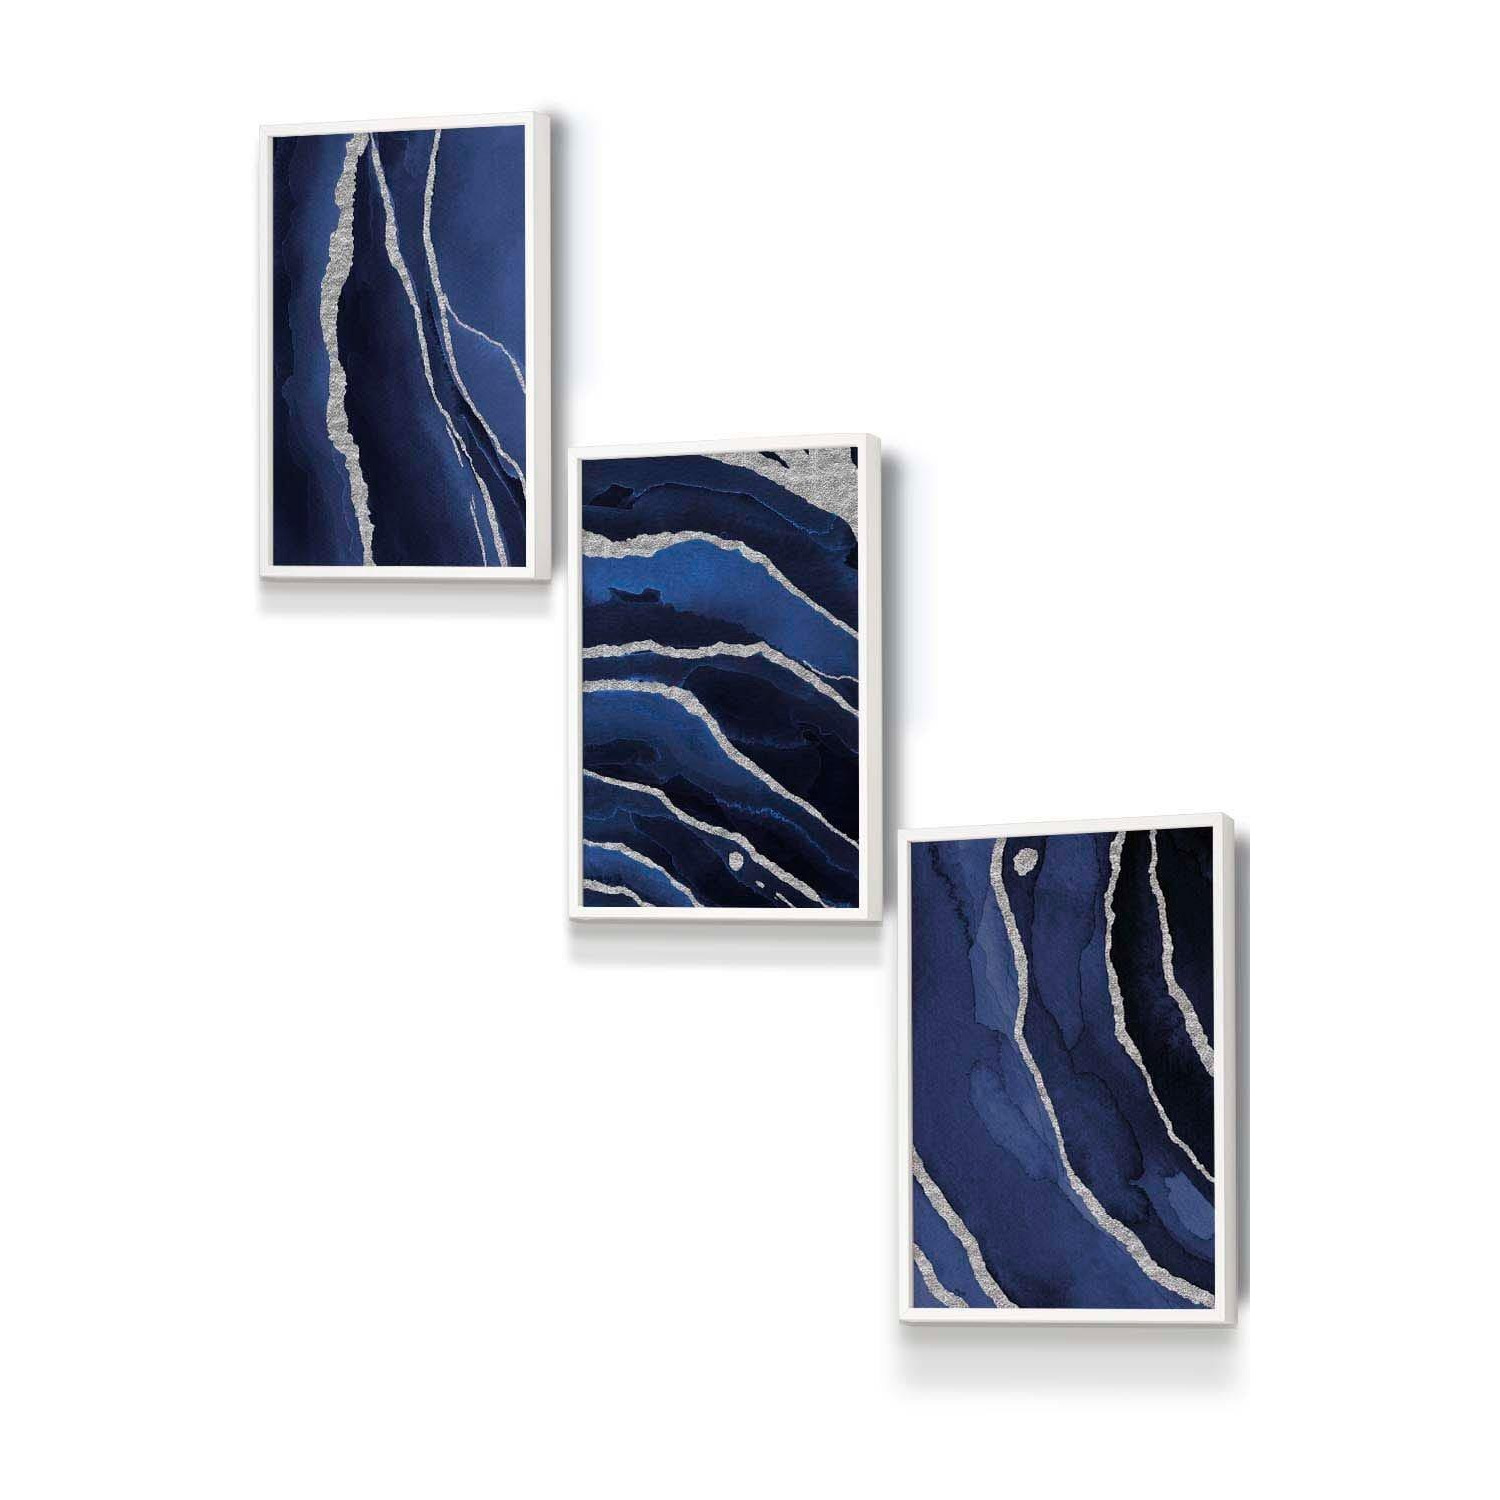 Abstract Navy Blue Silver Strokes Framed Wall Art - Small - image 1